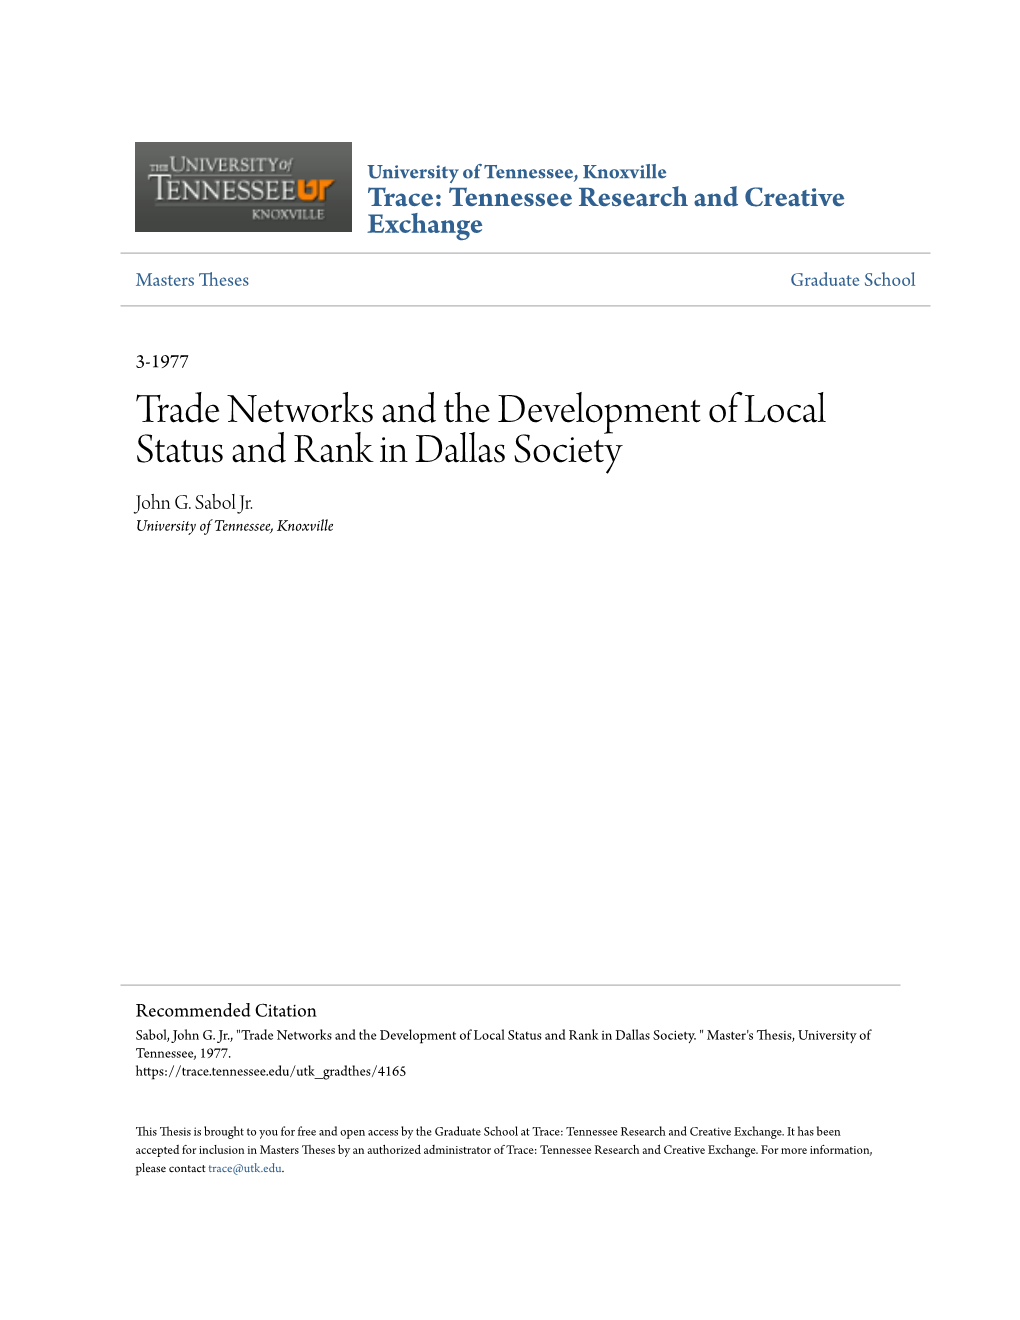 Trade Networks and the Development of Local Status and Rank in Dallas Society John G